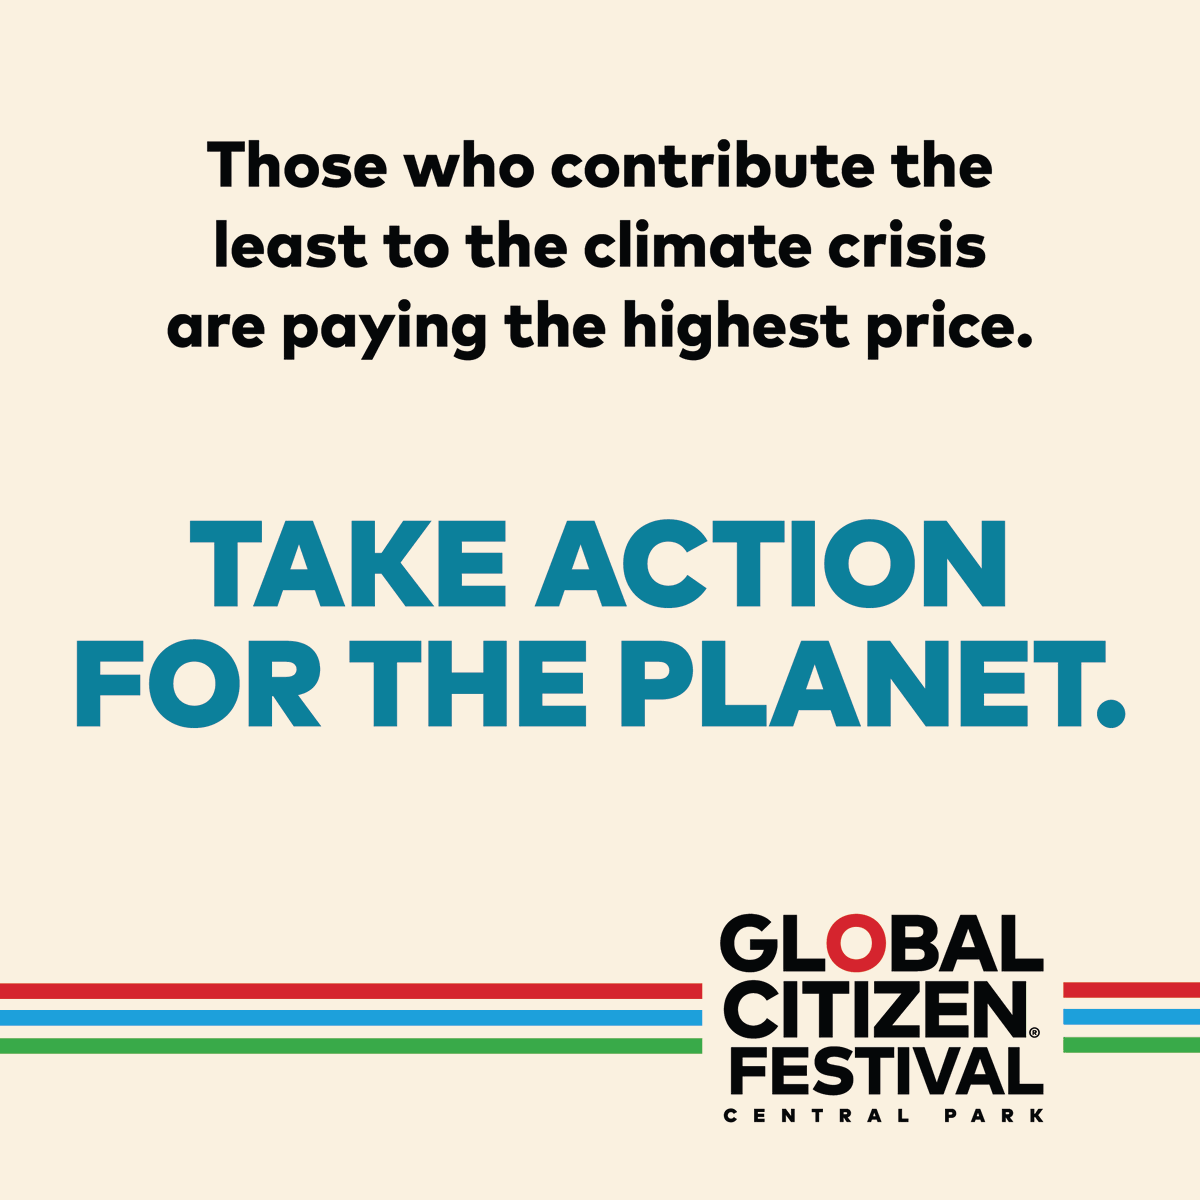 .@rifeintl has announced their ongoing commitment to #DefendthePlanet by signing onto the #PowerOurPlanet Private Sector Declaration at #GlobalCitizenFestival as part of the @UN Race to Zero initiative!